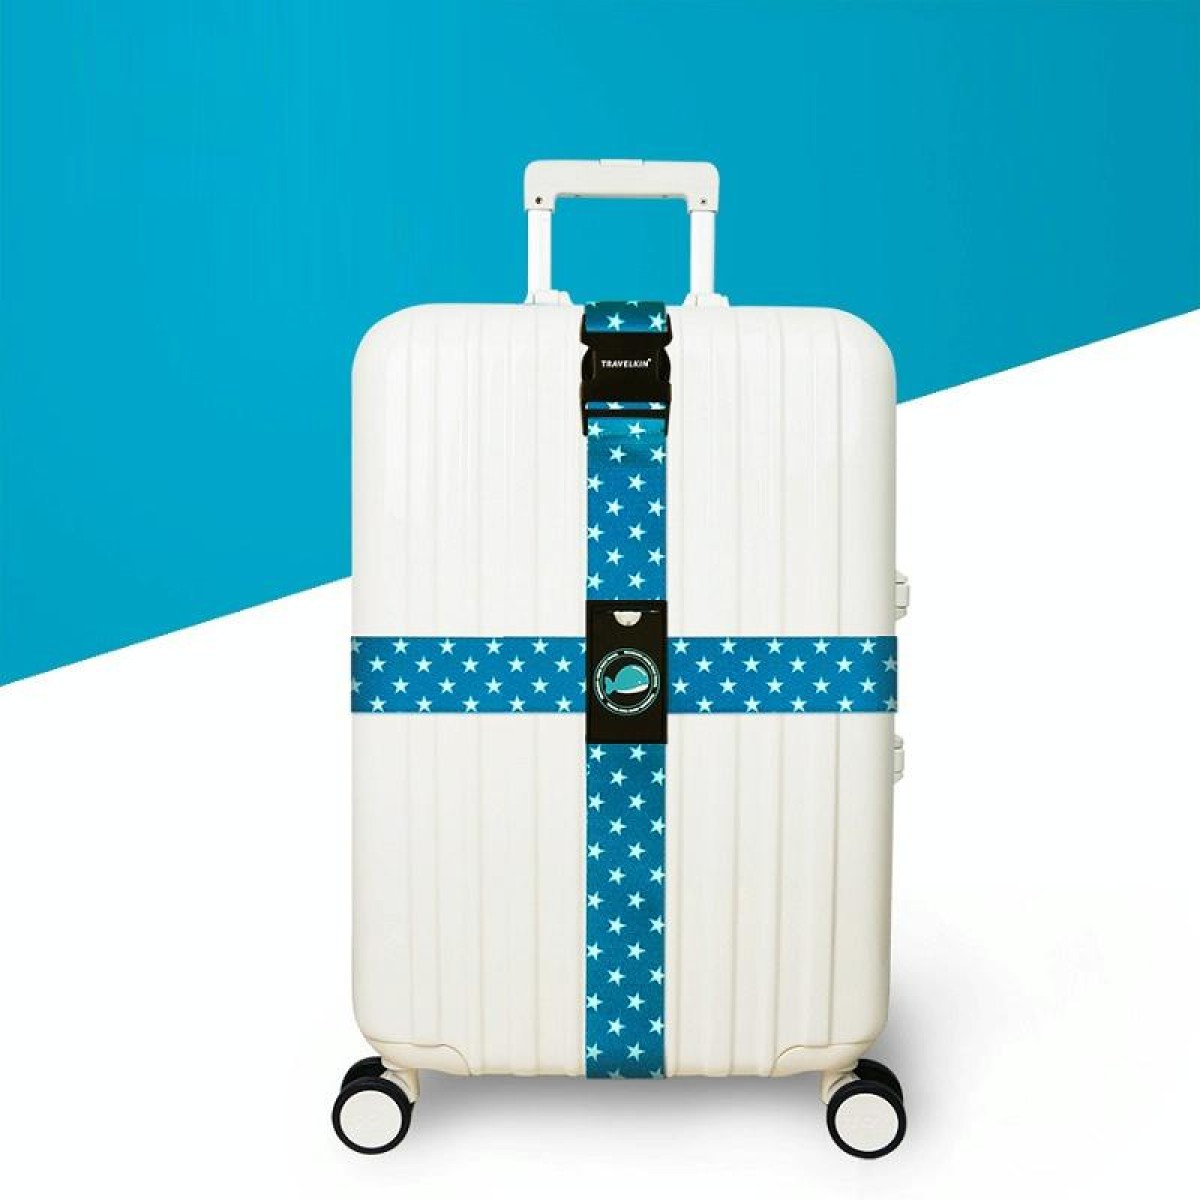 Cross Luggage Strap Without Combination Lock(Blue Star)